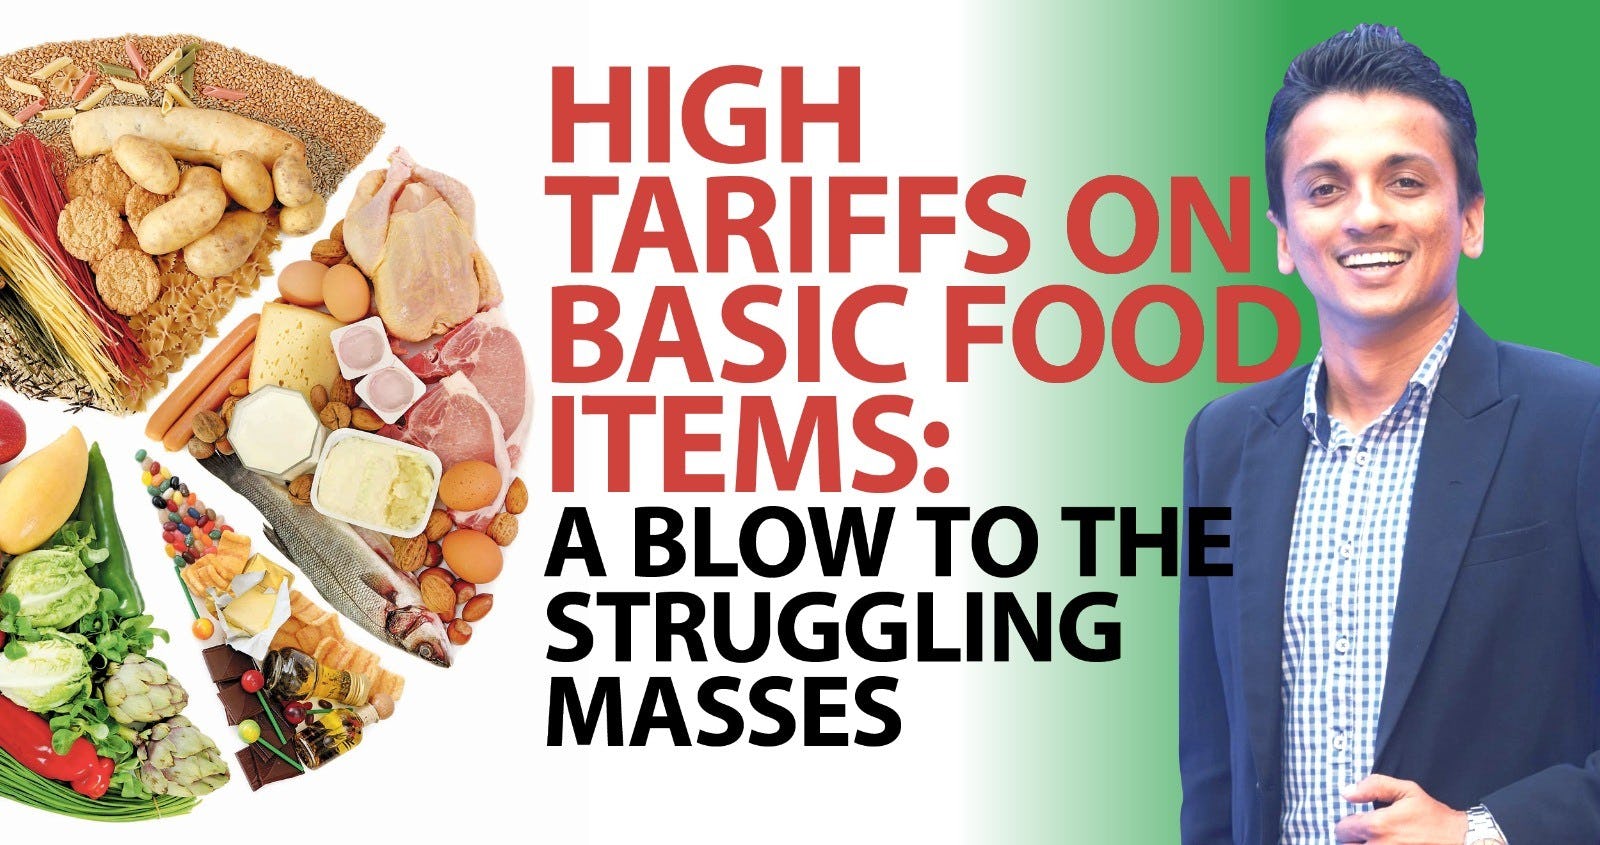 High tariffs on basic food items: A blow to the struggling masses